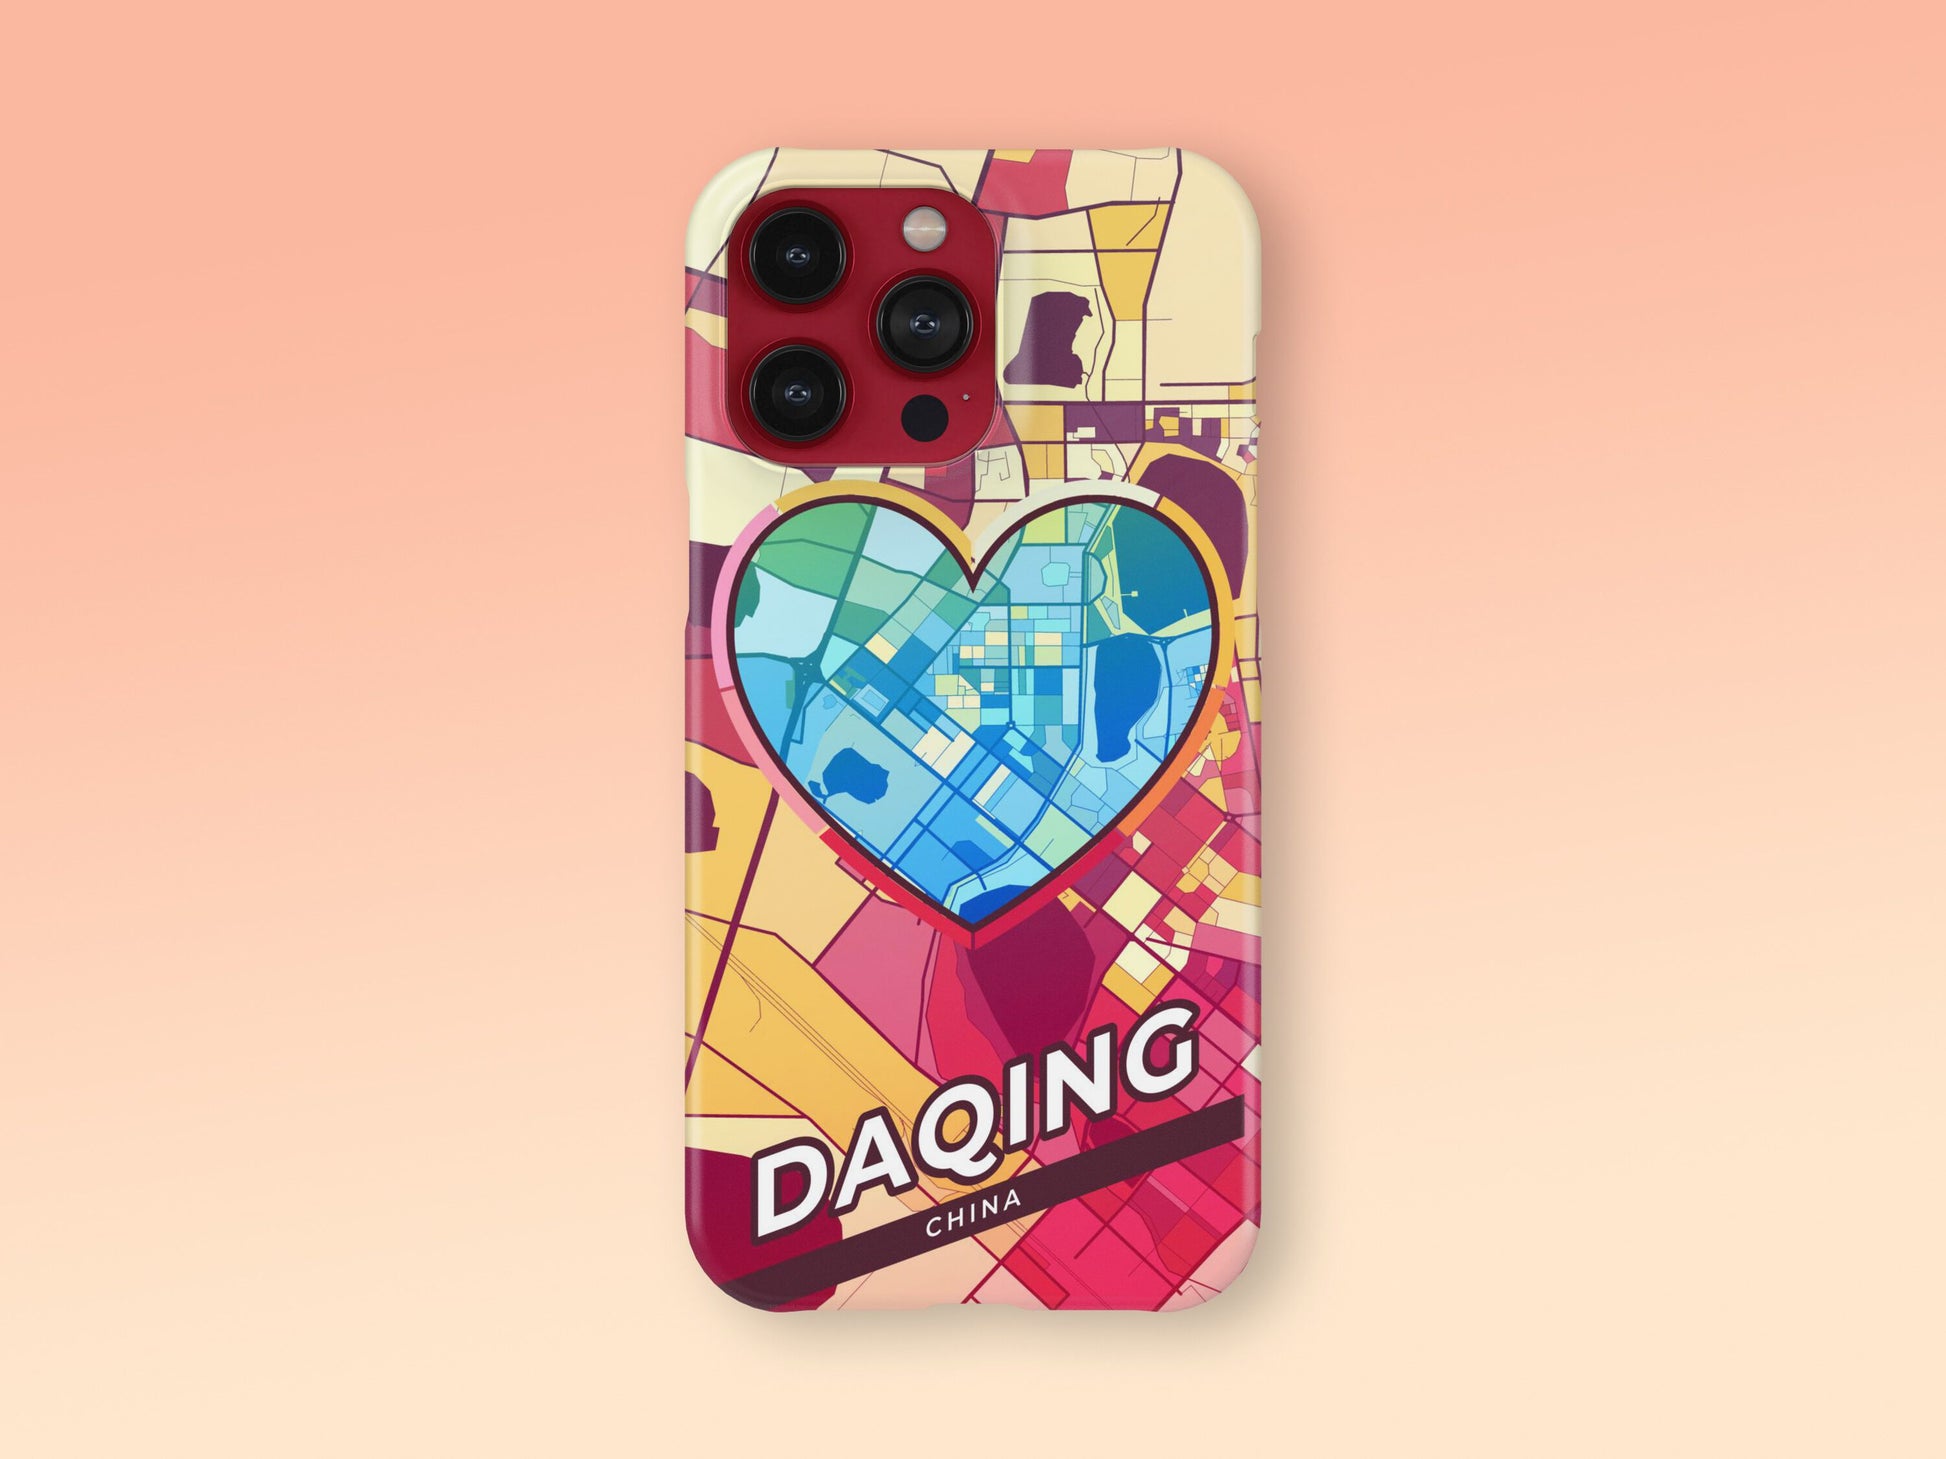 Daqing China slim phone case with colorful icon. Birthday, wedding or housewarming gift. Couple match cases. 2